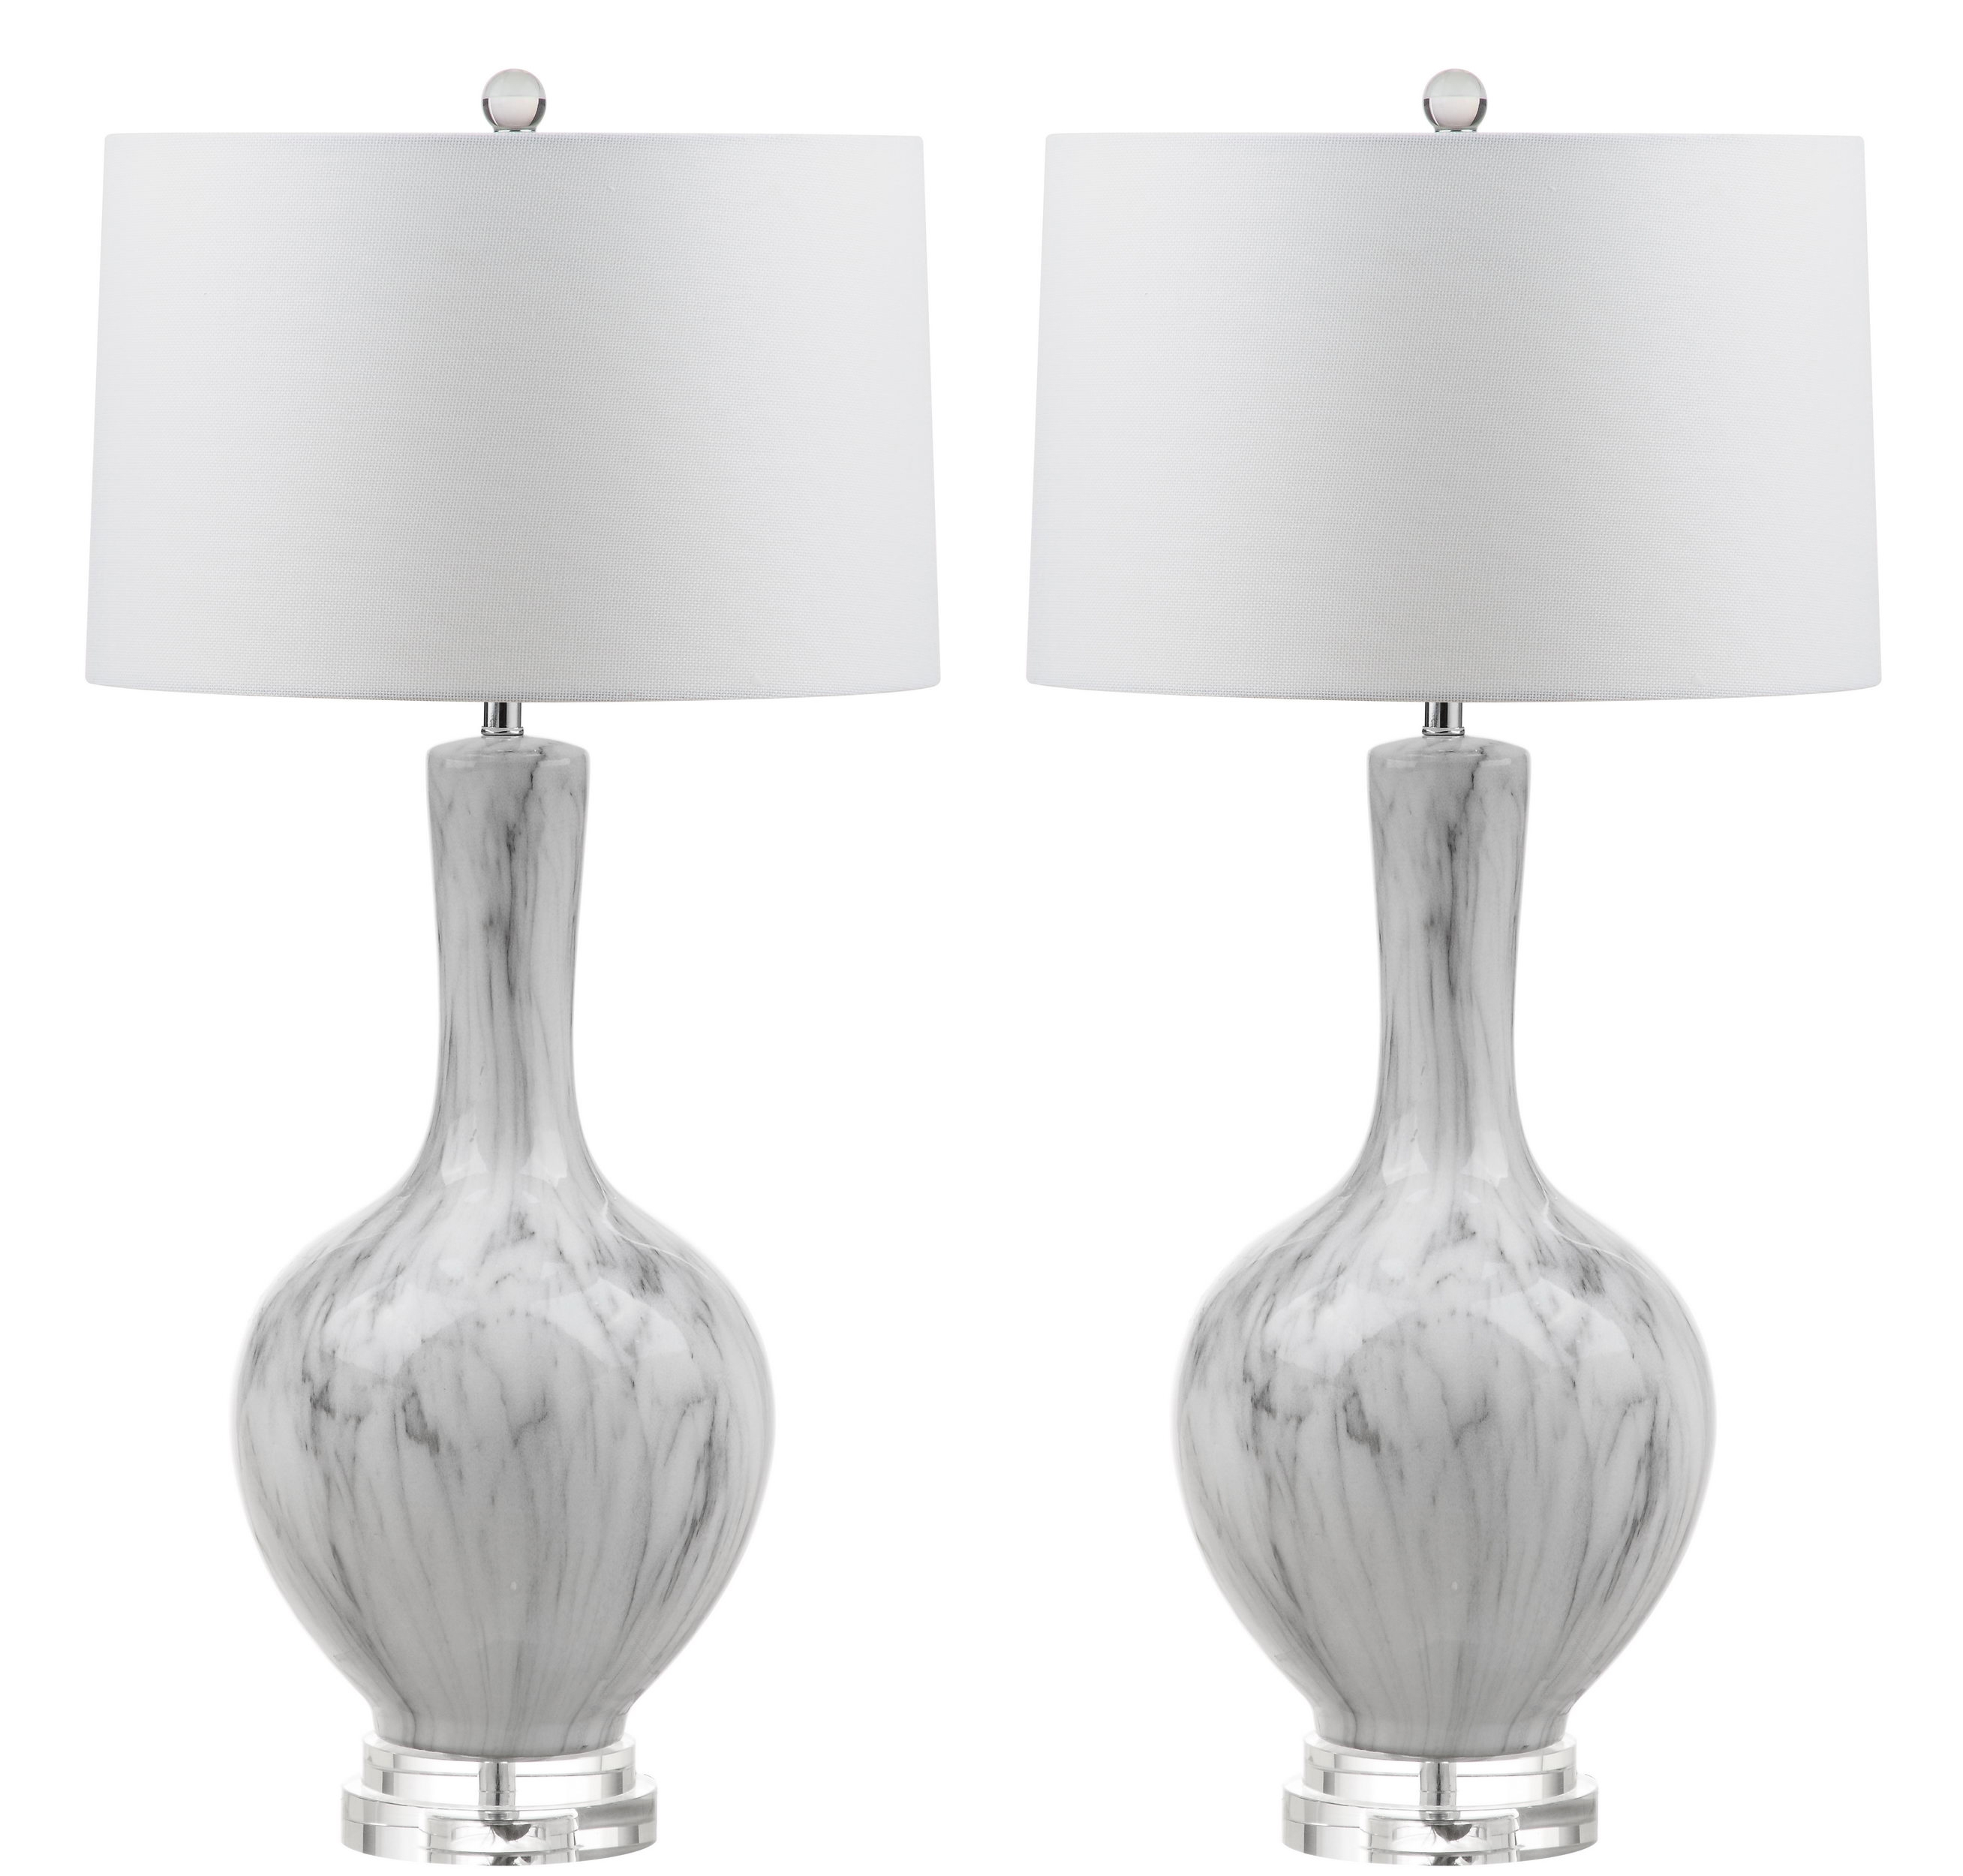 Griffith Table Lamp - White/Grey - Arlo Home - Image 0